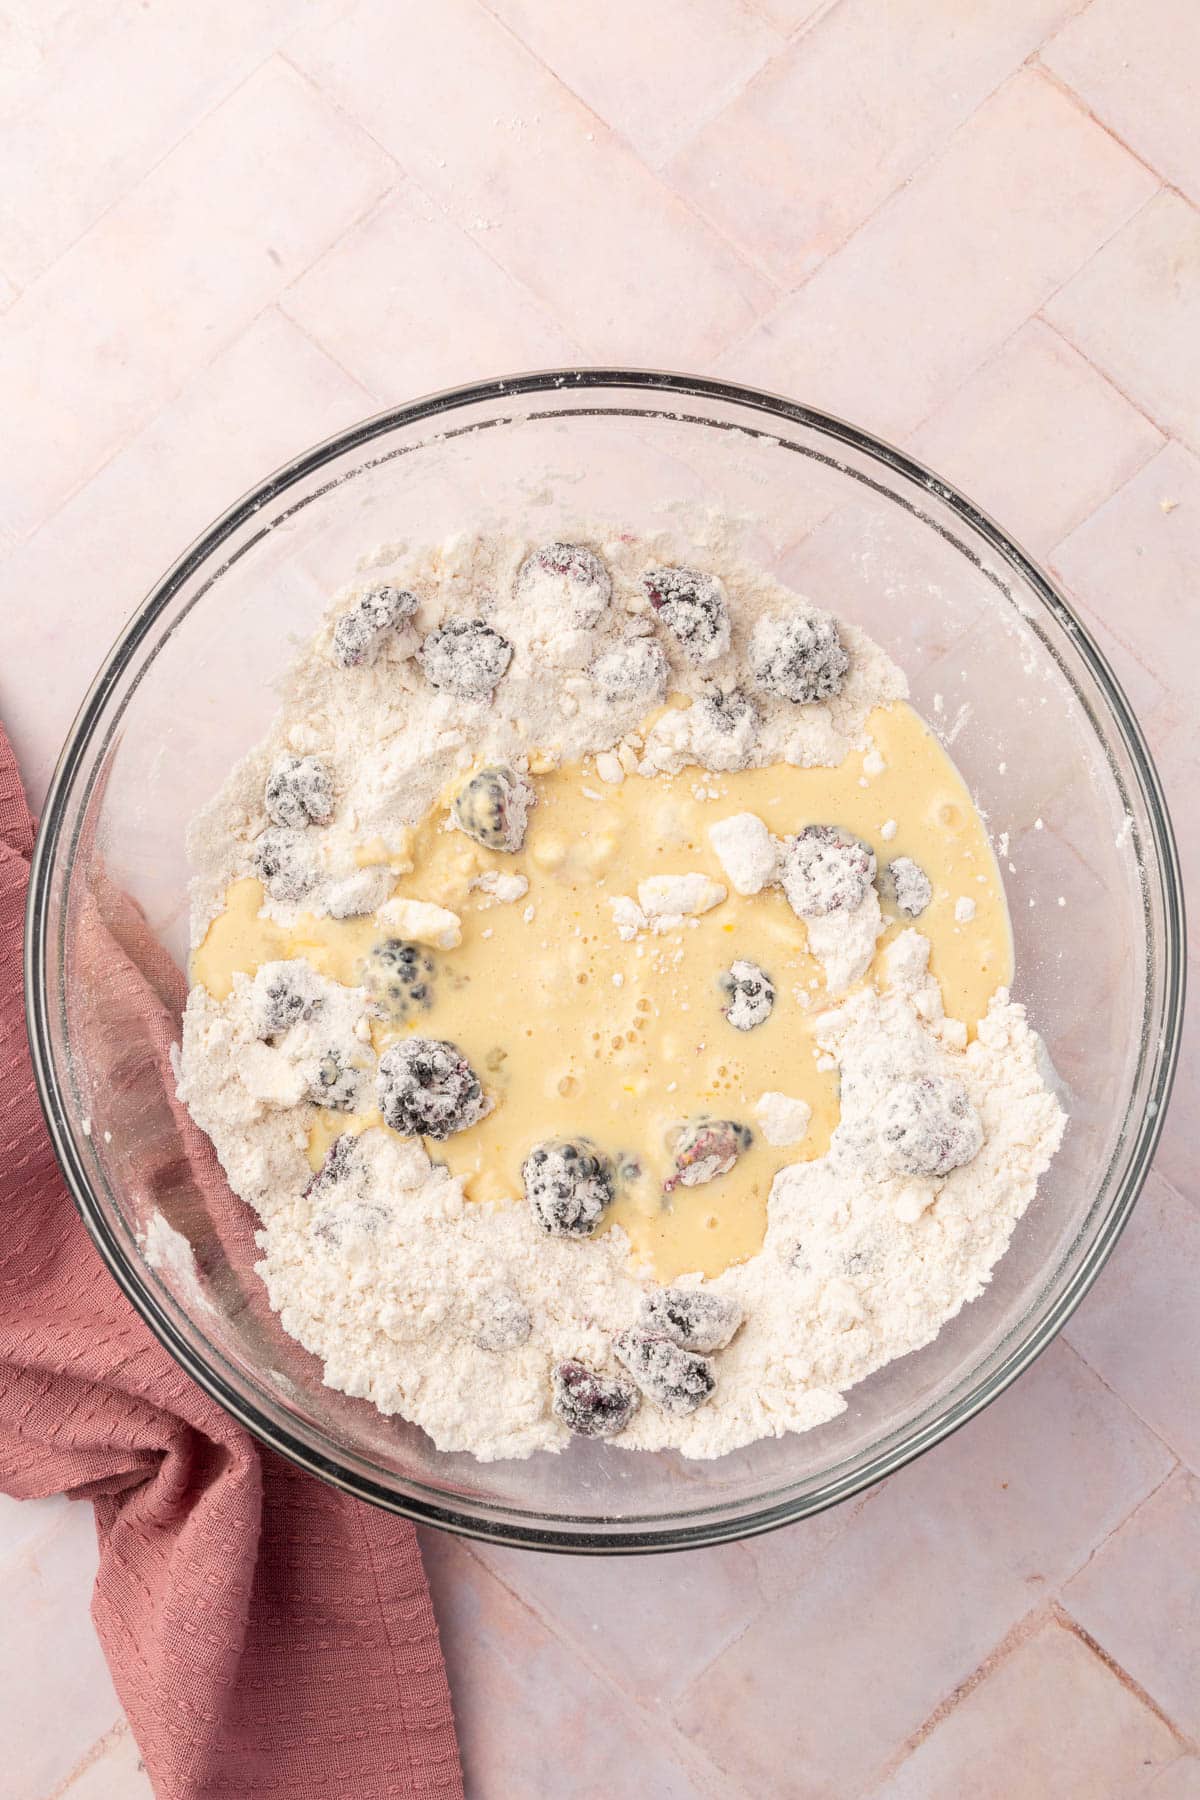 An overhead view of gluten-free flour mixed with fresh blackberries that has a buttermilk mixture poured over it.